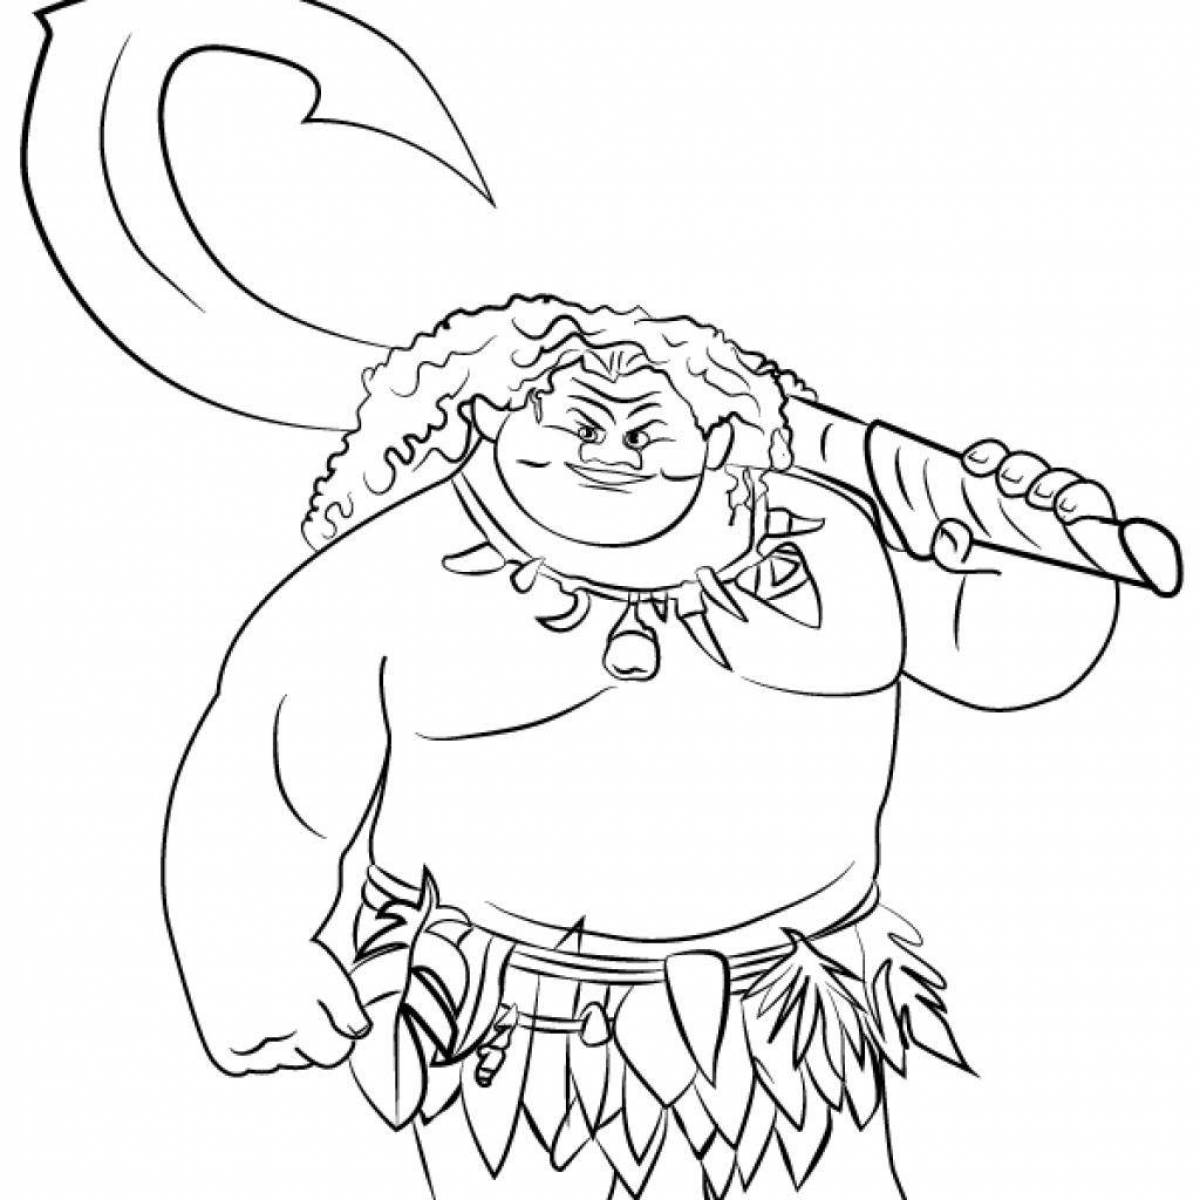 Exciting Maui coloring book